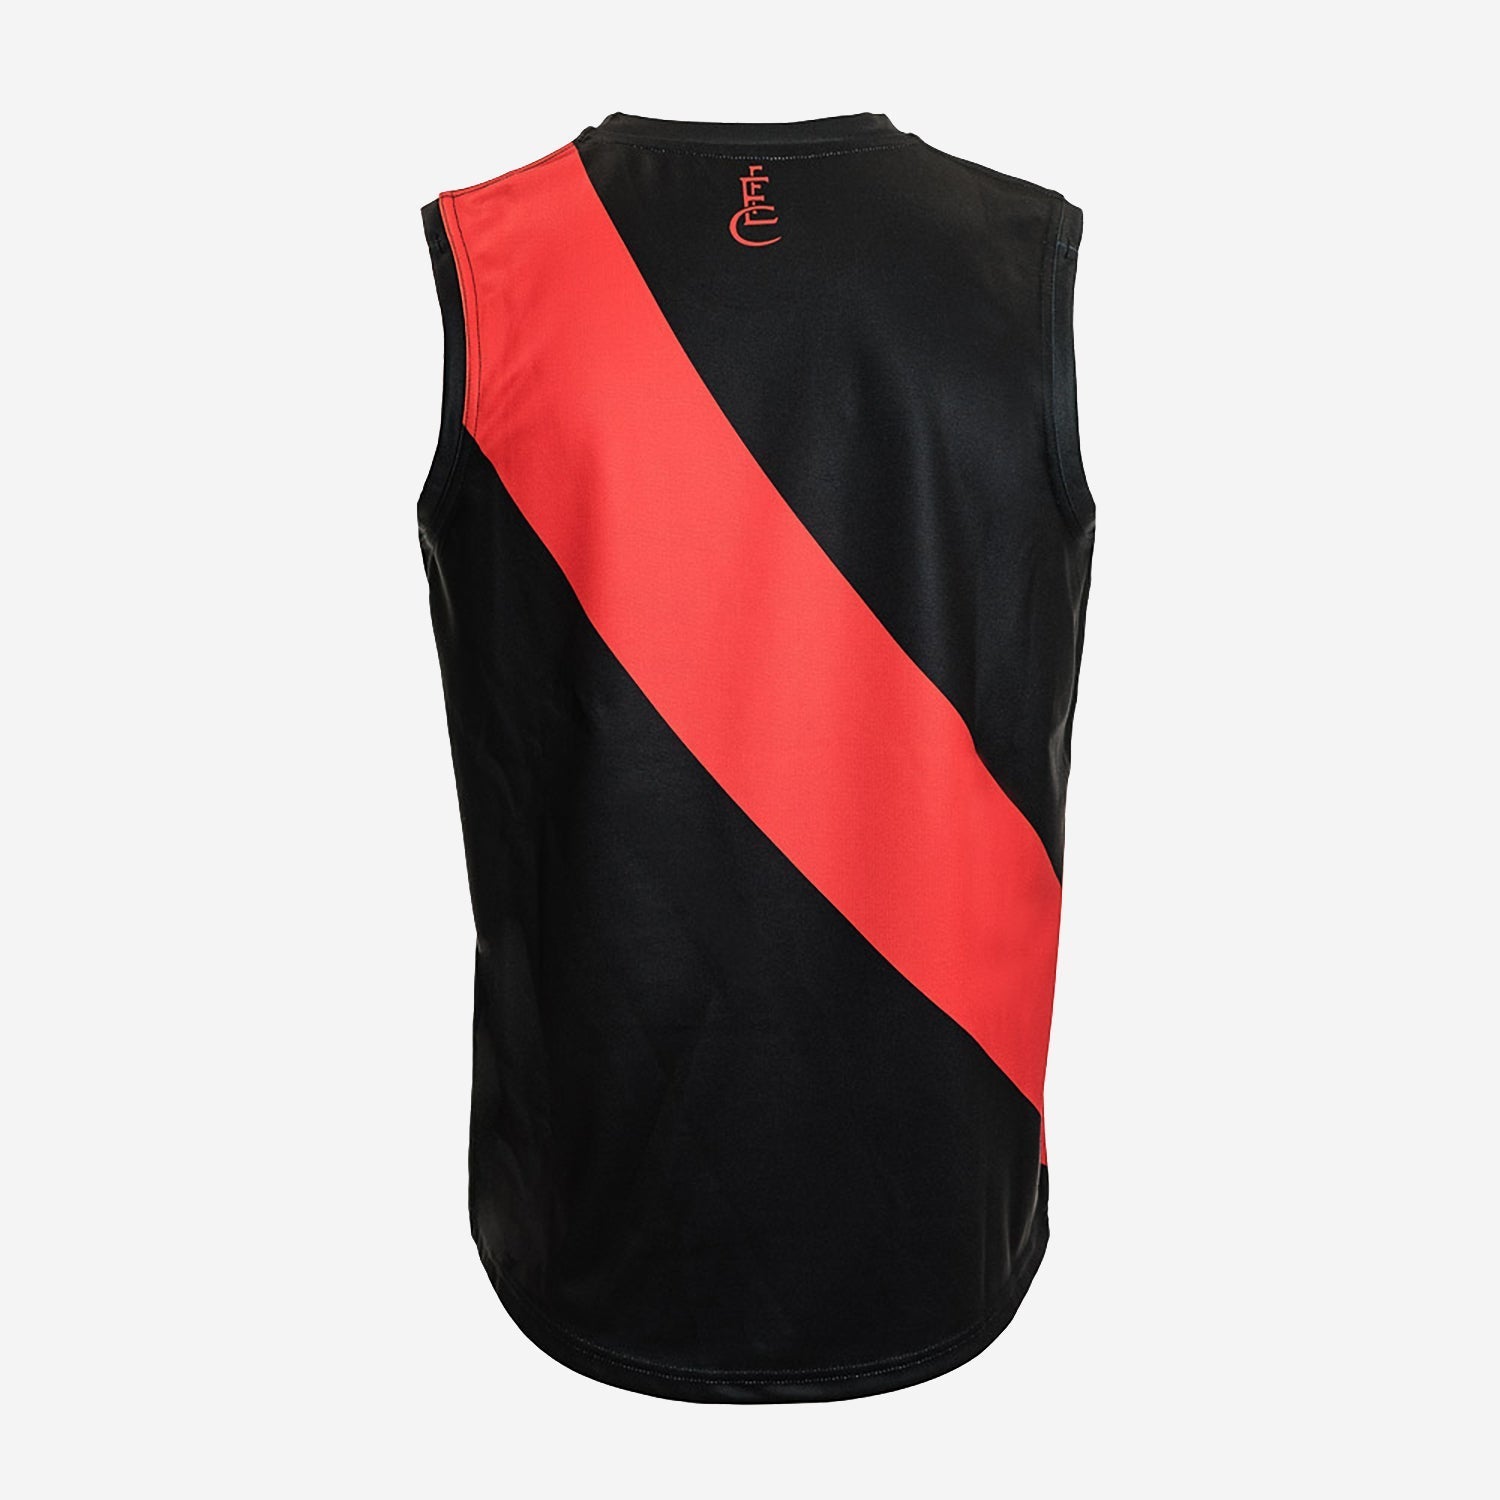 Essendon Bombers - AFL Replica Adult Guernsey - The Cricket Warehouse